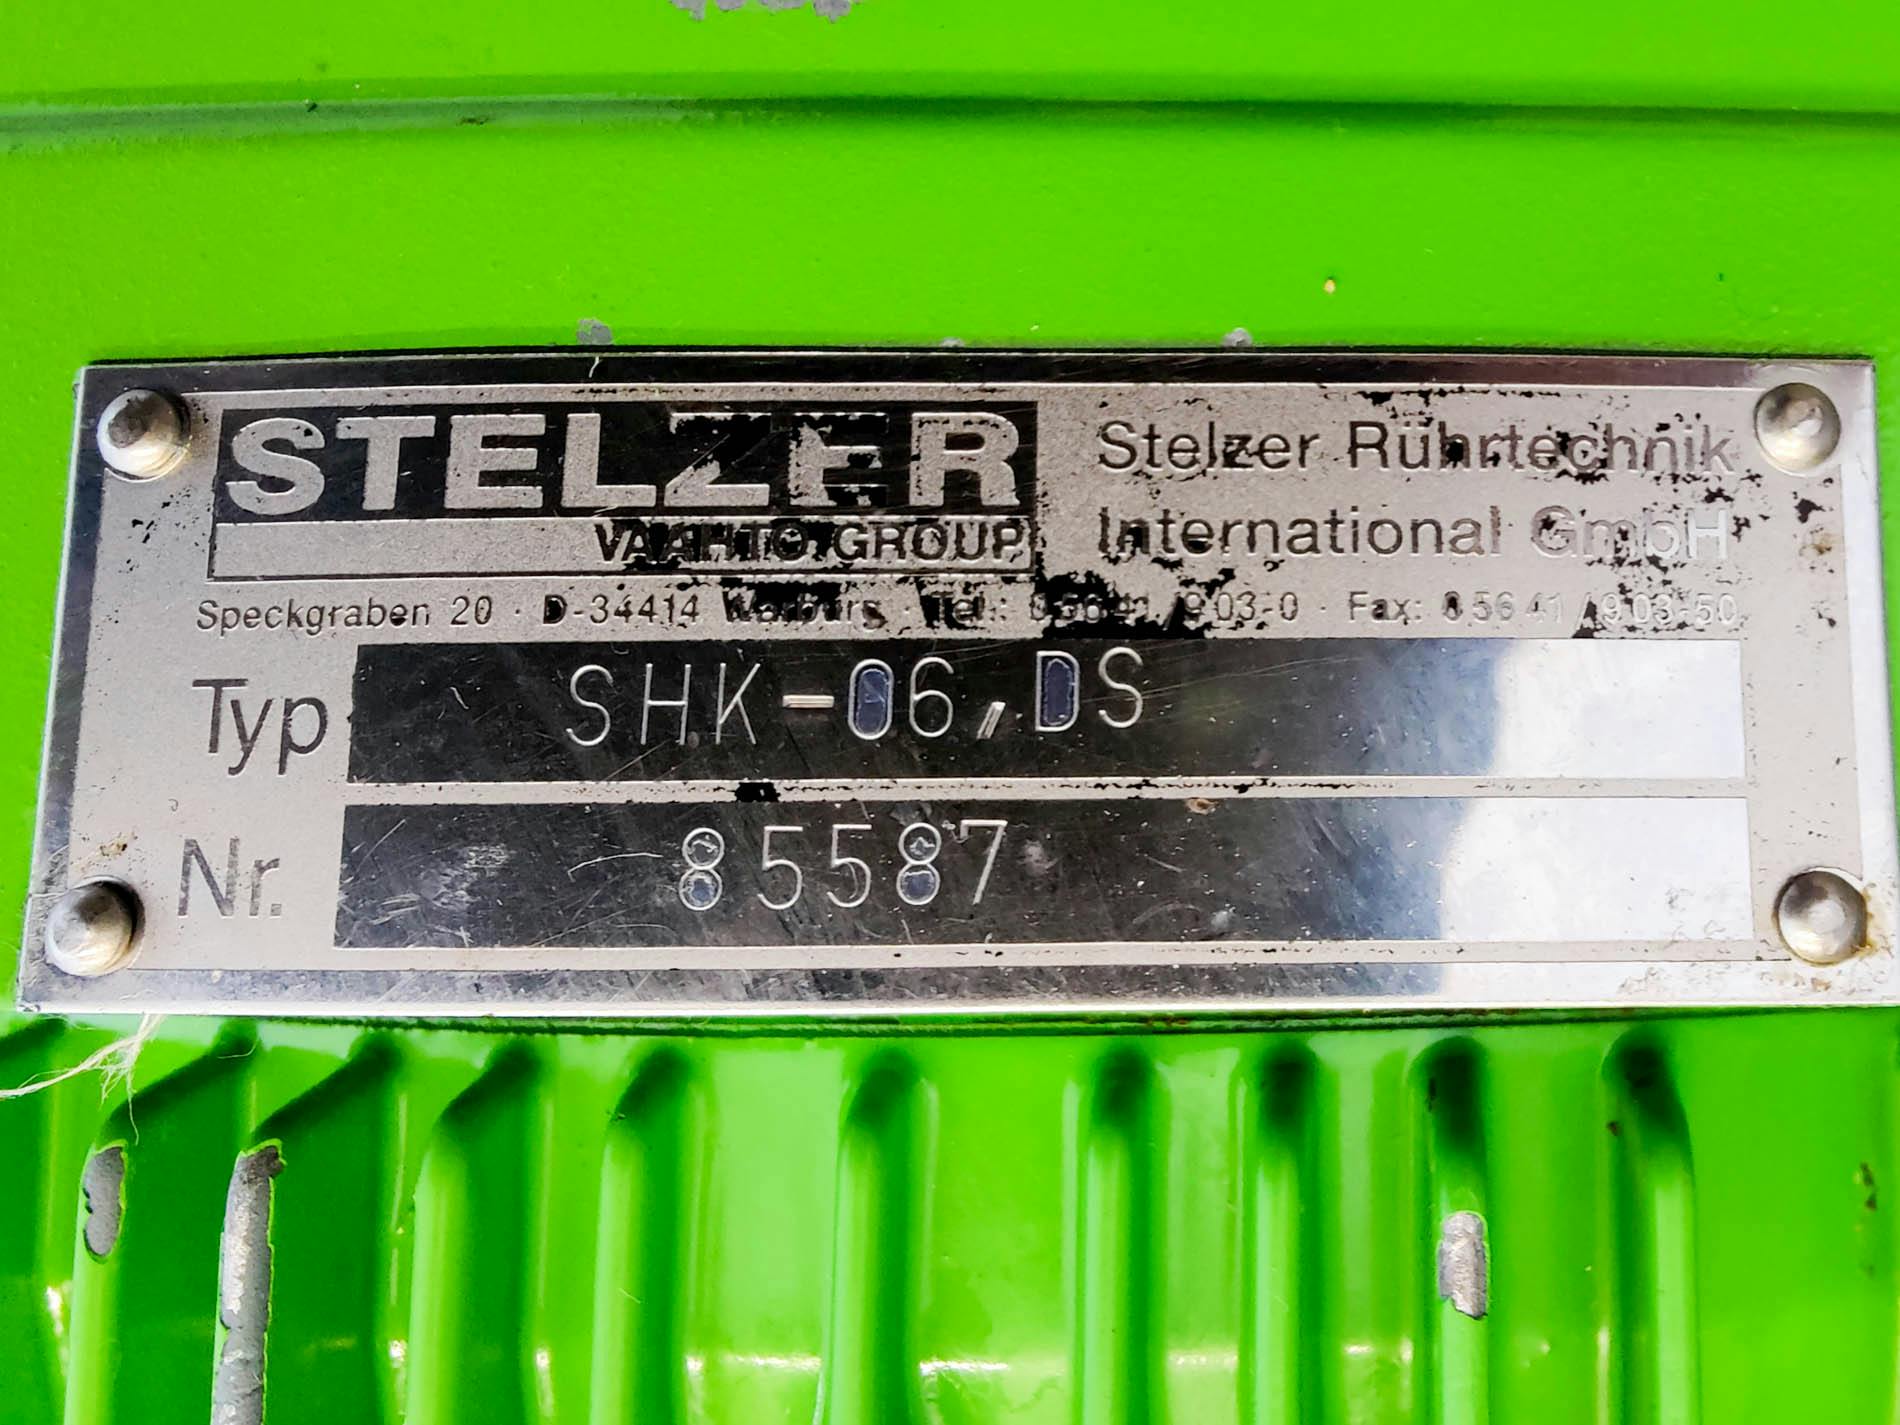 STC Engineering Stapelbehälter 6500 Ltr. - Cuve mélangeuse - image 6